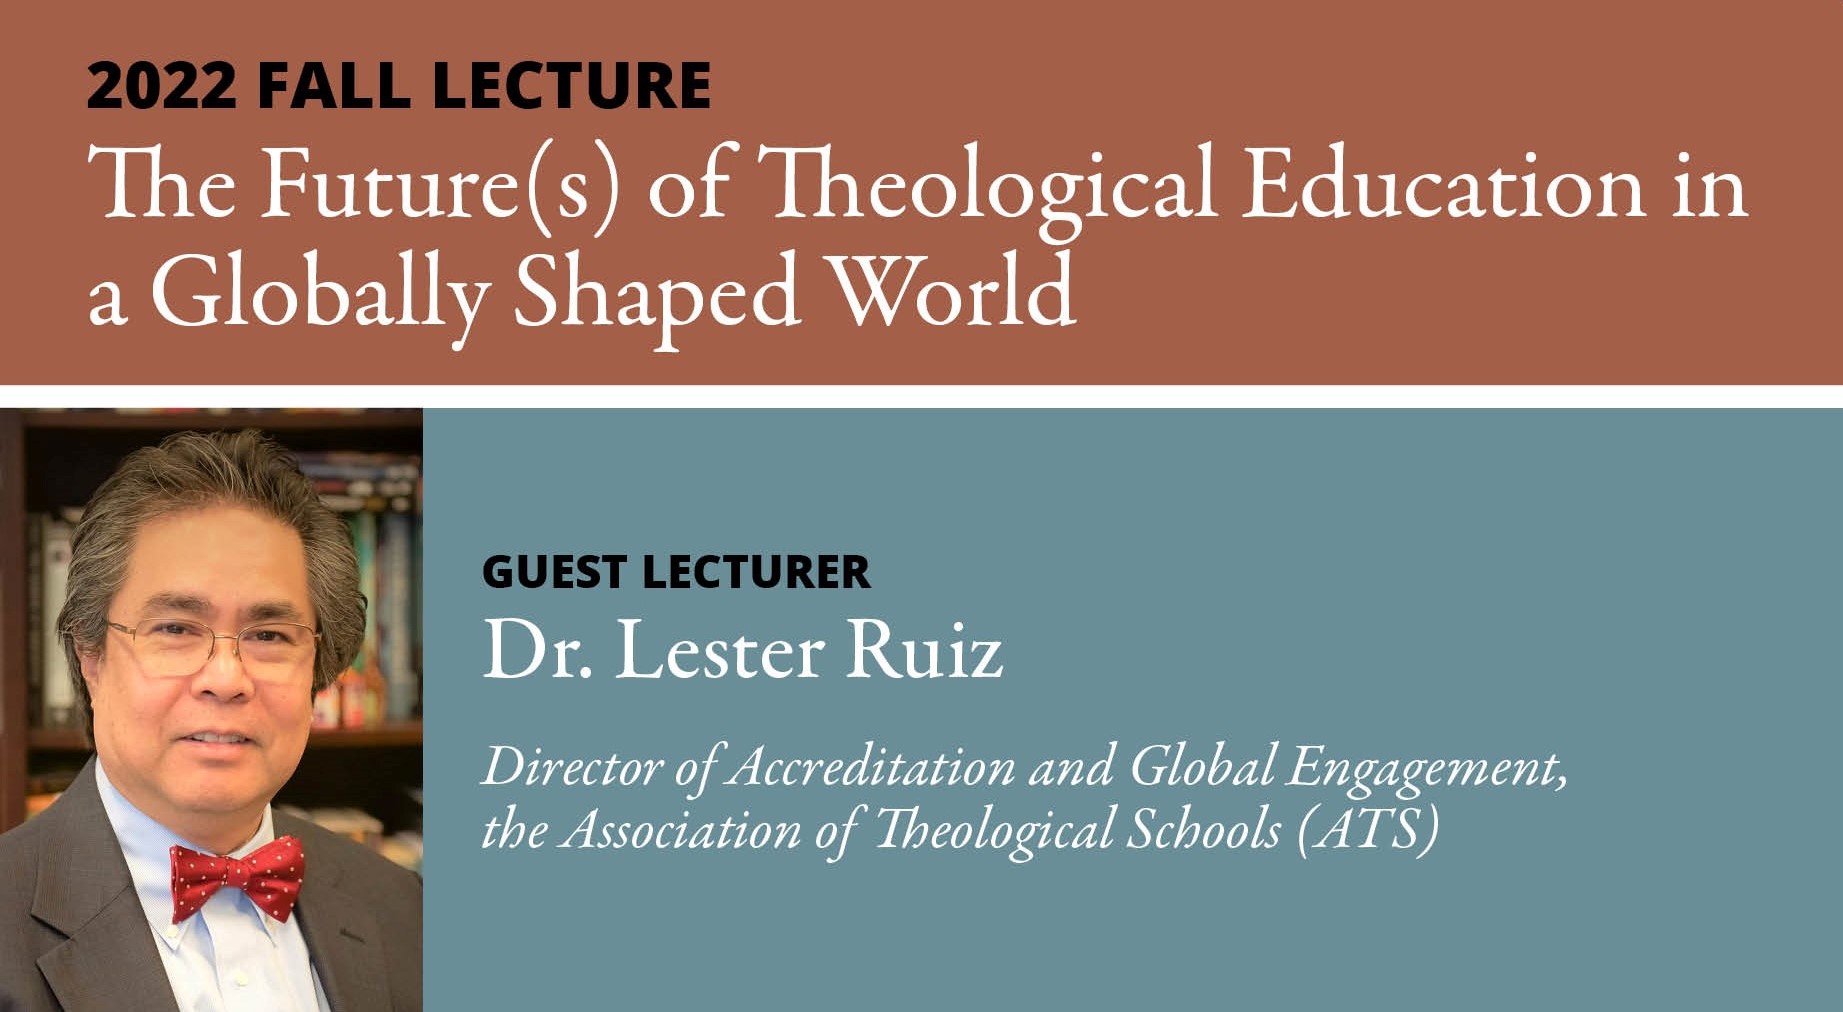 WATCH THE VIDEO: Lester Ruiz was the featured speaker for the Paul G. Hiebert Center for World Christianity and Global Theology's fall 2022 lecture at Trinity Evangelical Divinity School. He was joined by James Moore, who served as a respondent.